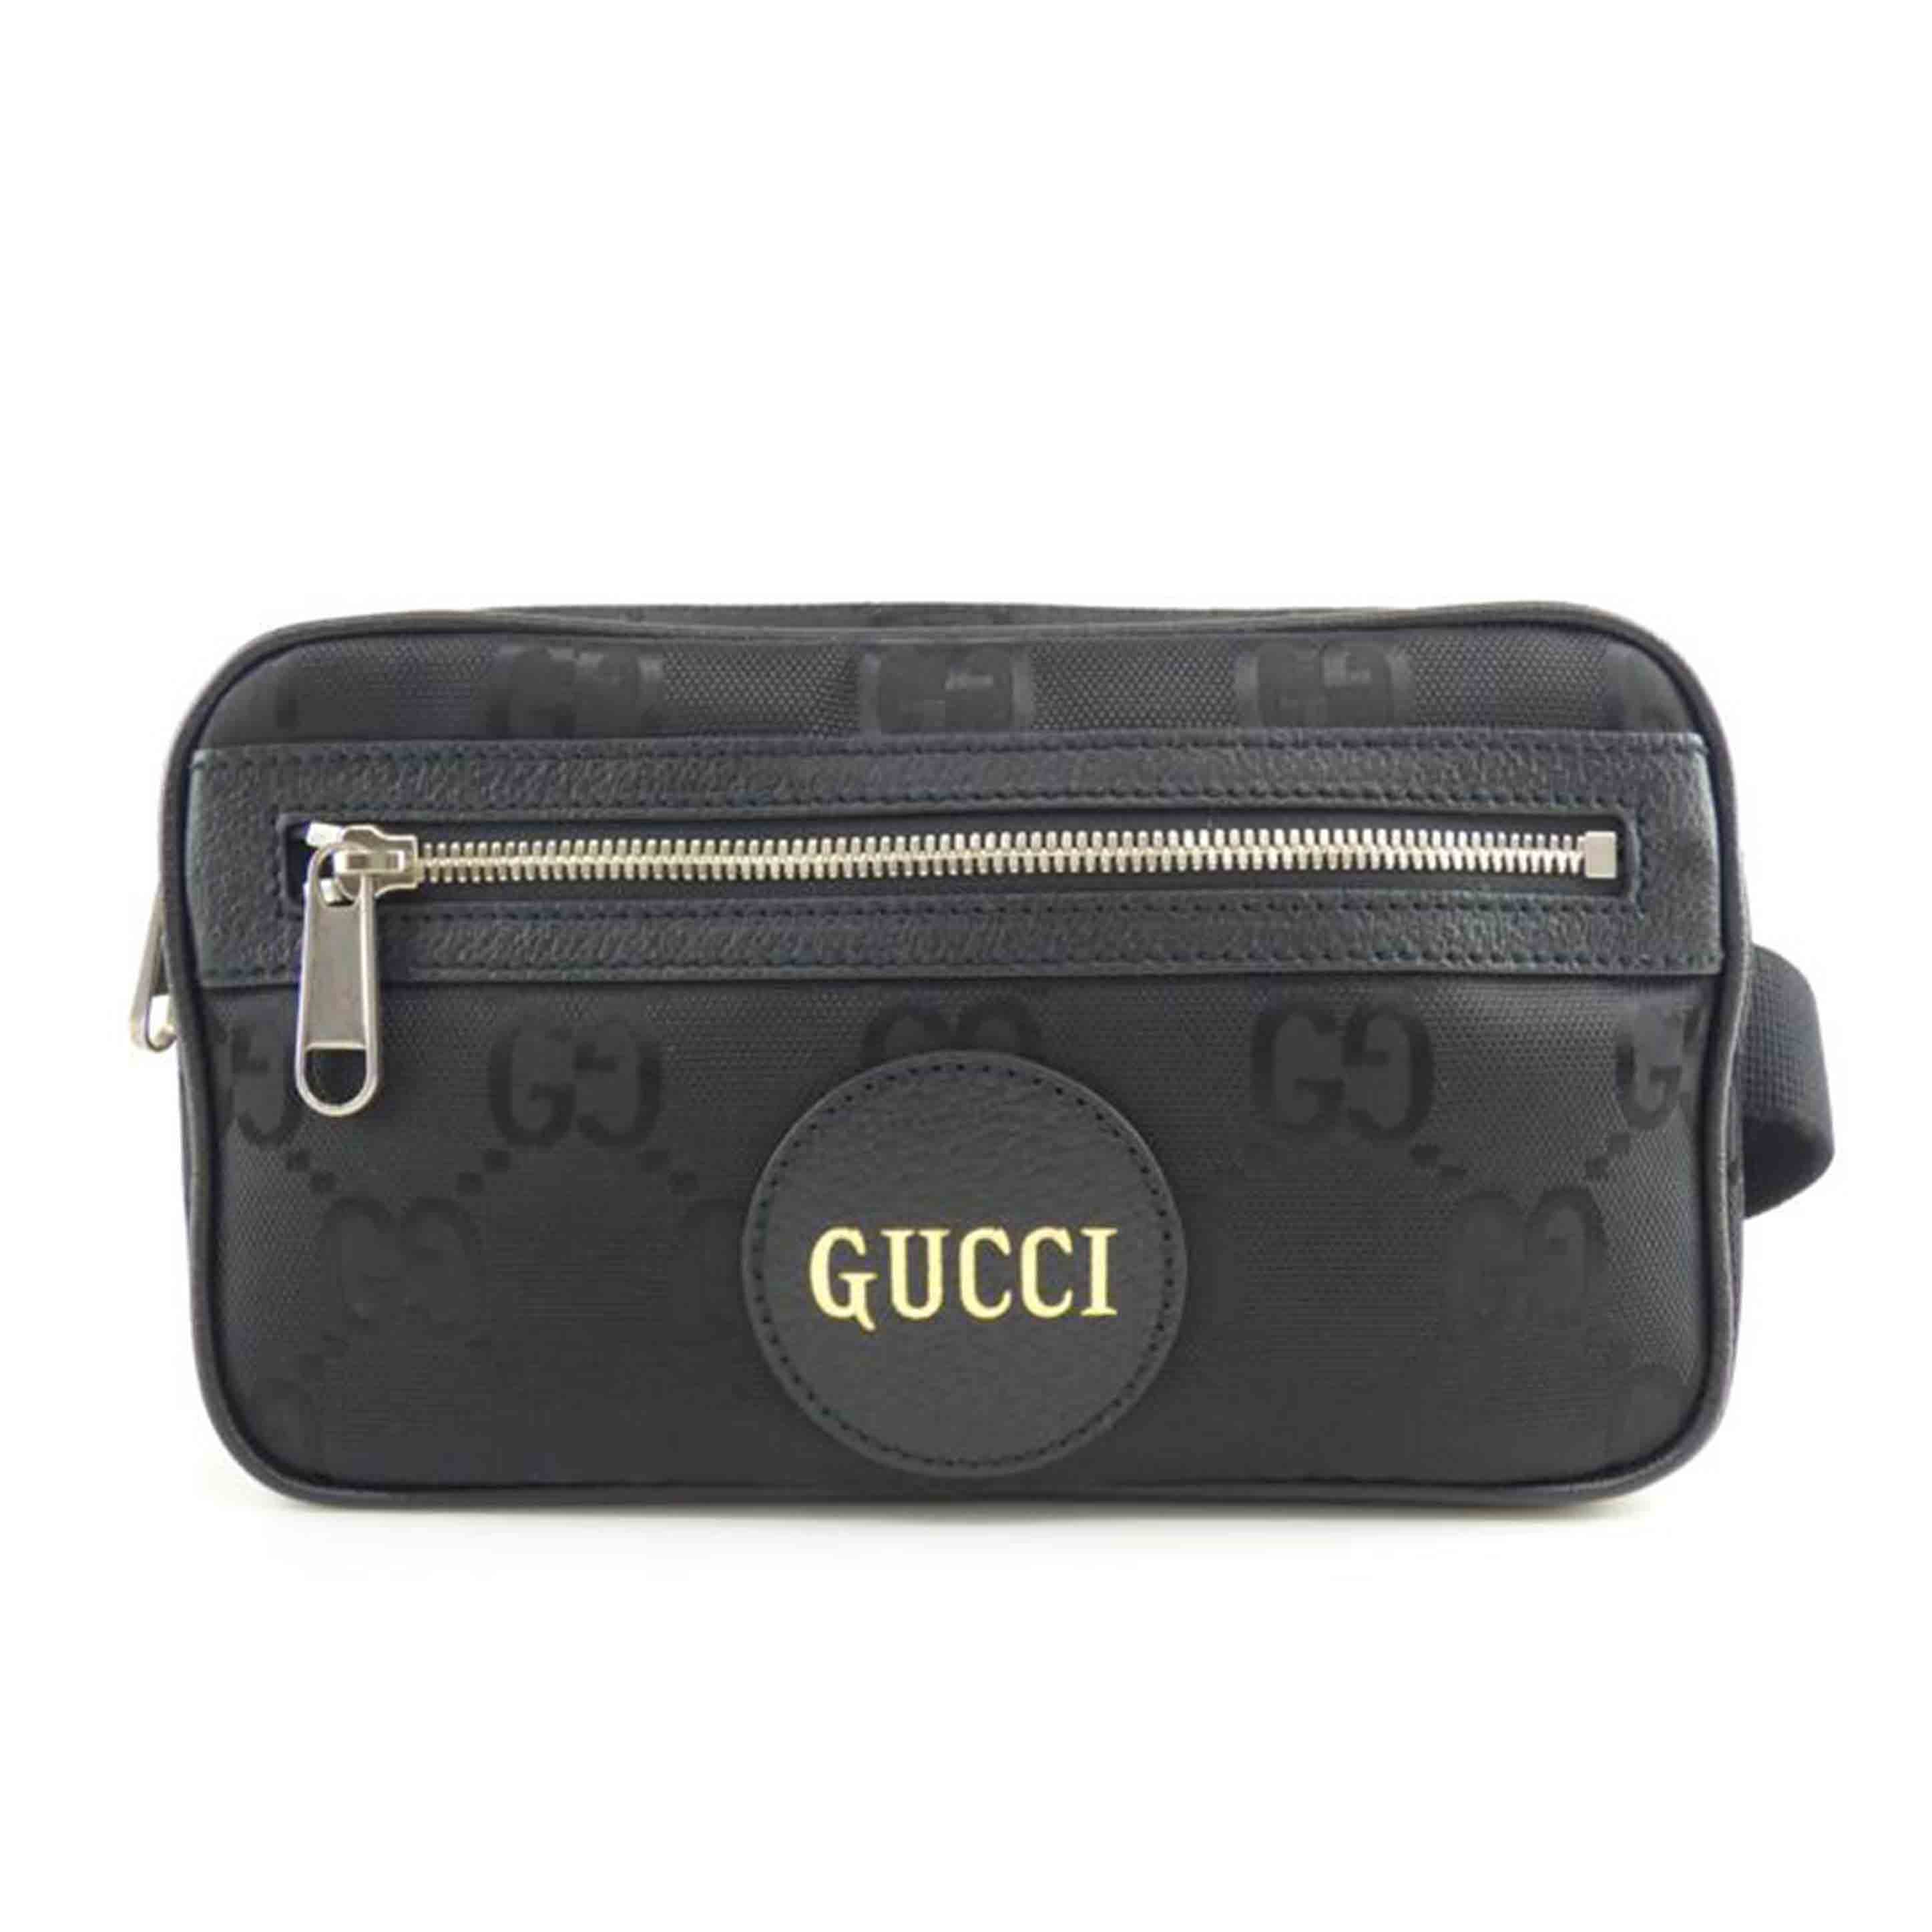 GUCCI（グッチ）商品一覧｜ワンダーレックス公式通販サイト